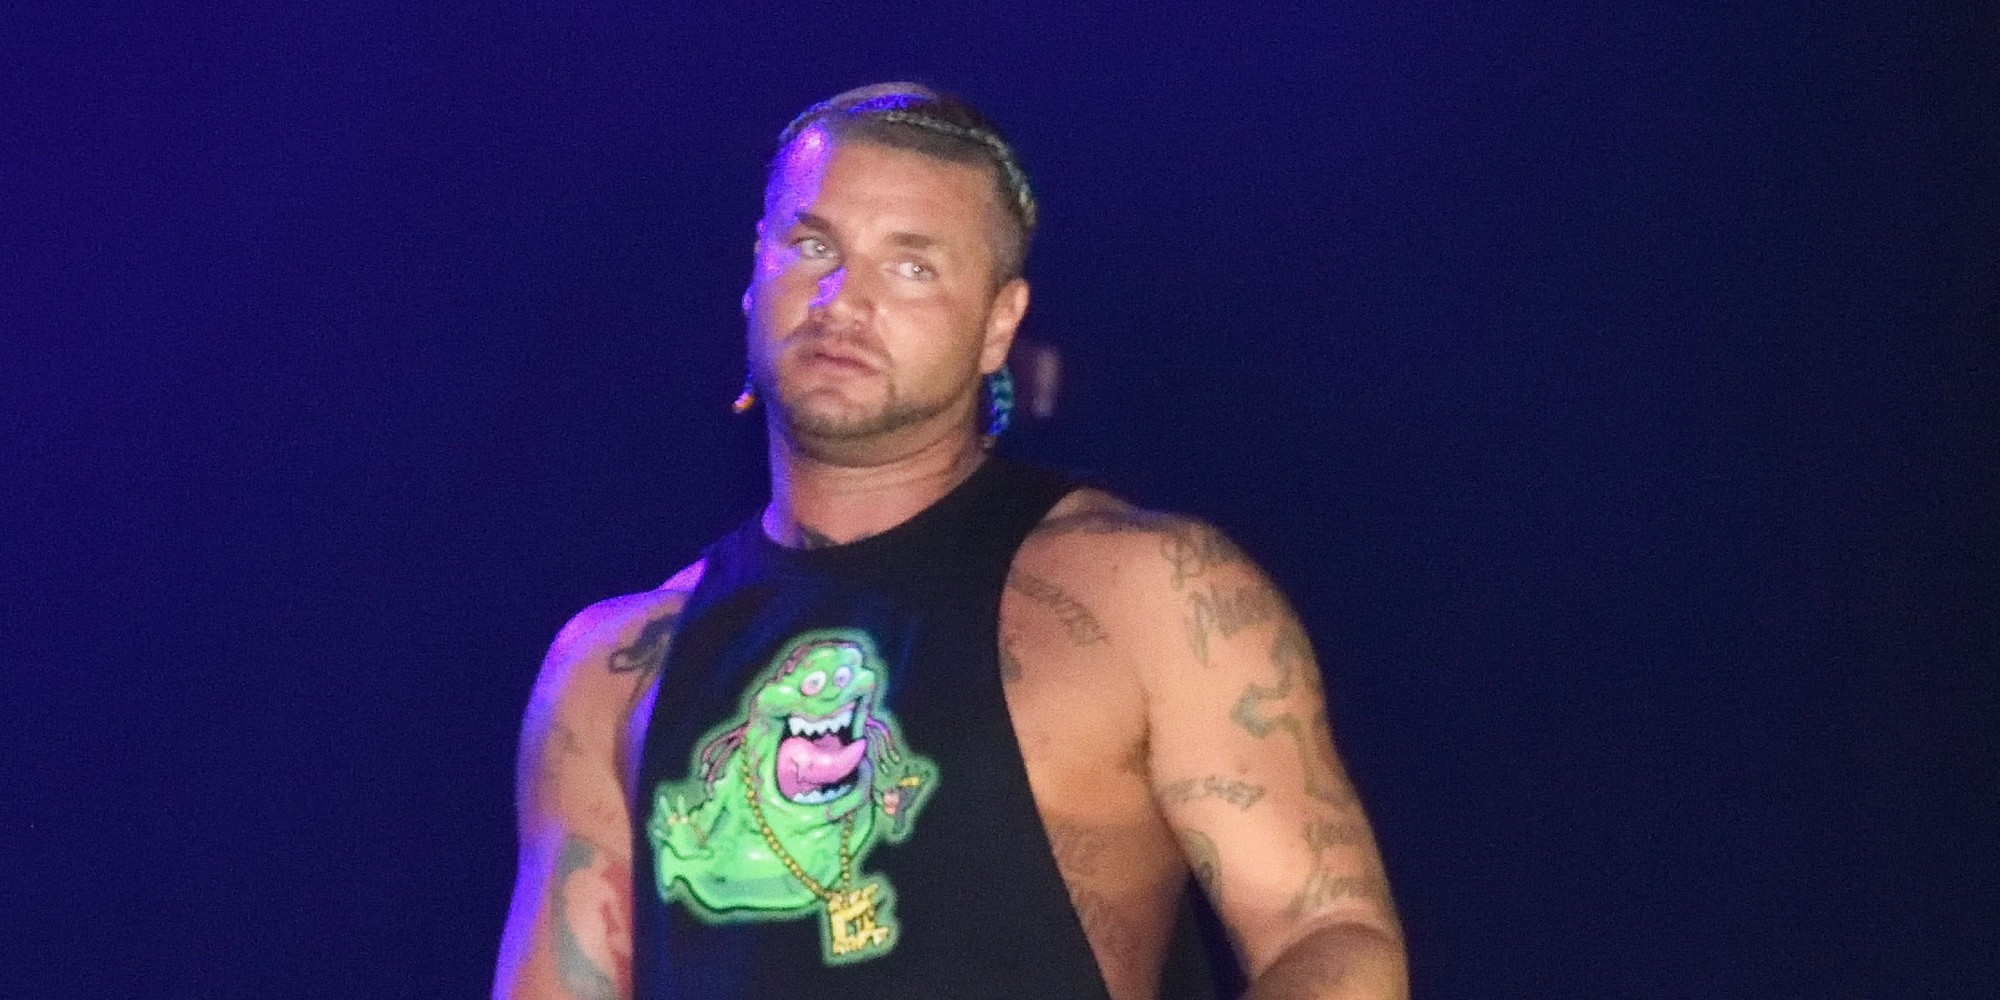 Riff Raff Gains 55 Pounds Of Muscle And Is Completely Unrecognizable